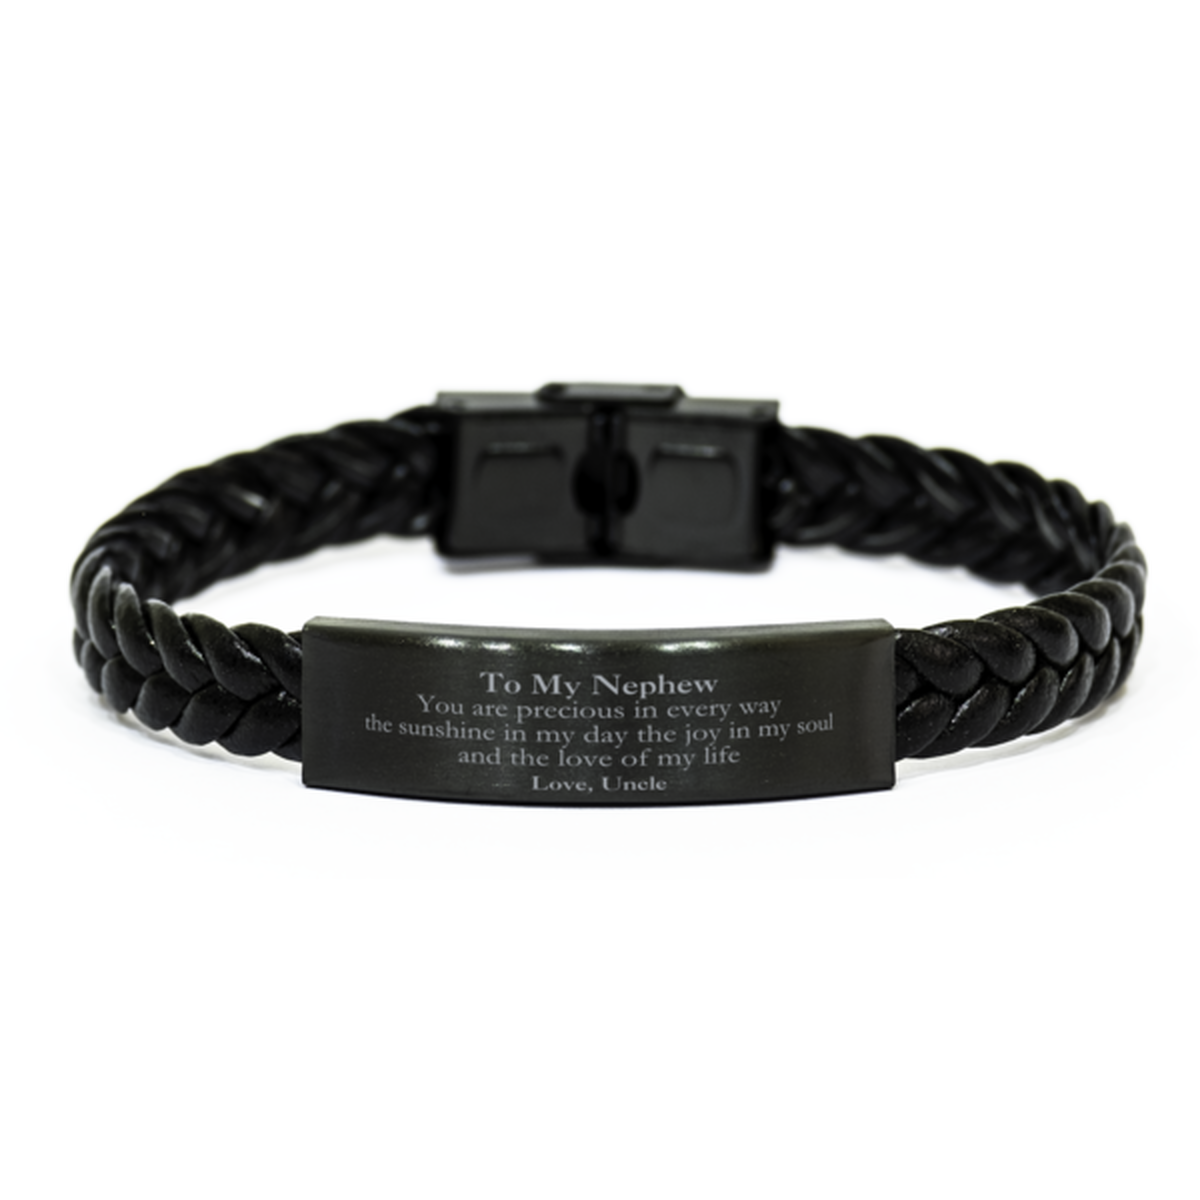 Graduation Gifts for Nephew Braided Leather Bracelet Present from Uncle, Christmas Nephew Birthday Gifts Nephew You are precious in every way the sunshine in my day. Love, Uncle